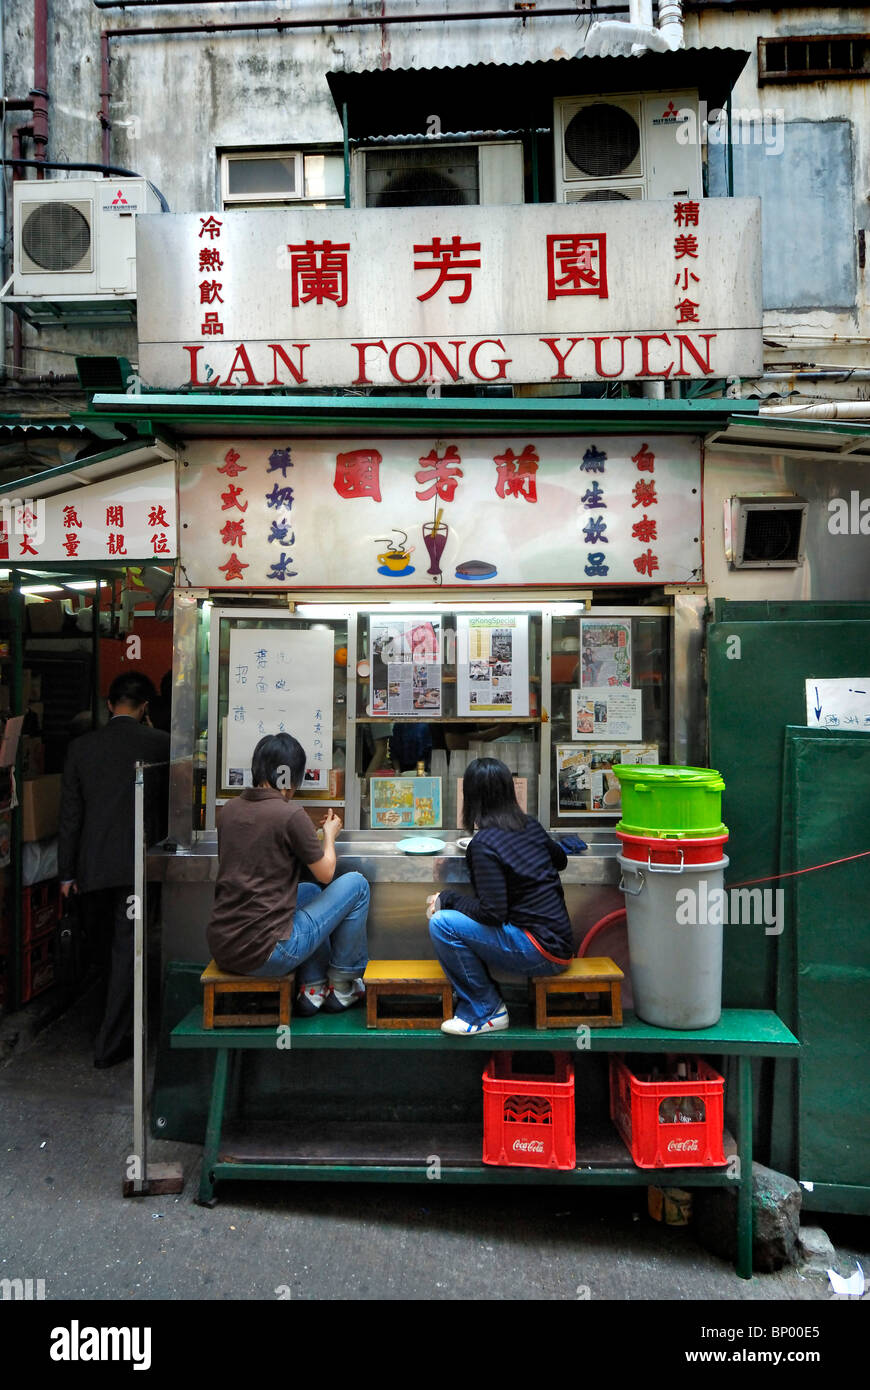 Lan Fong Yuen, a more than 50-year old food stall in Gage Street which is famous for its milk tea in Hong Kong style. Stock Photo